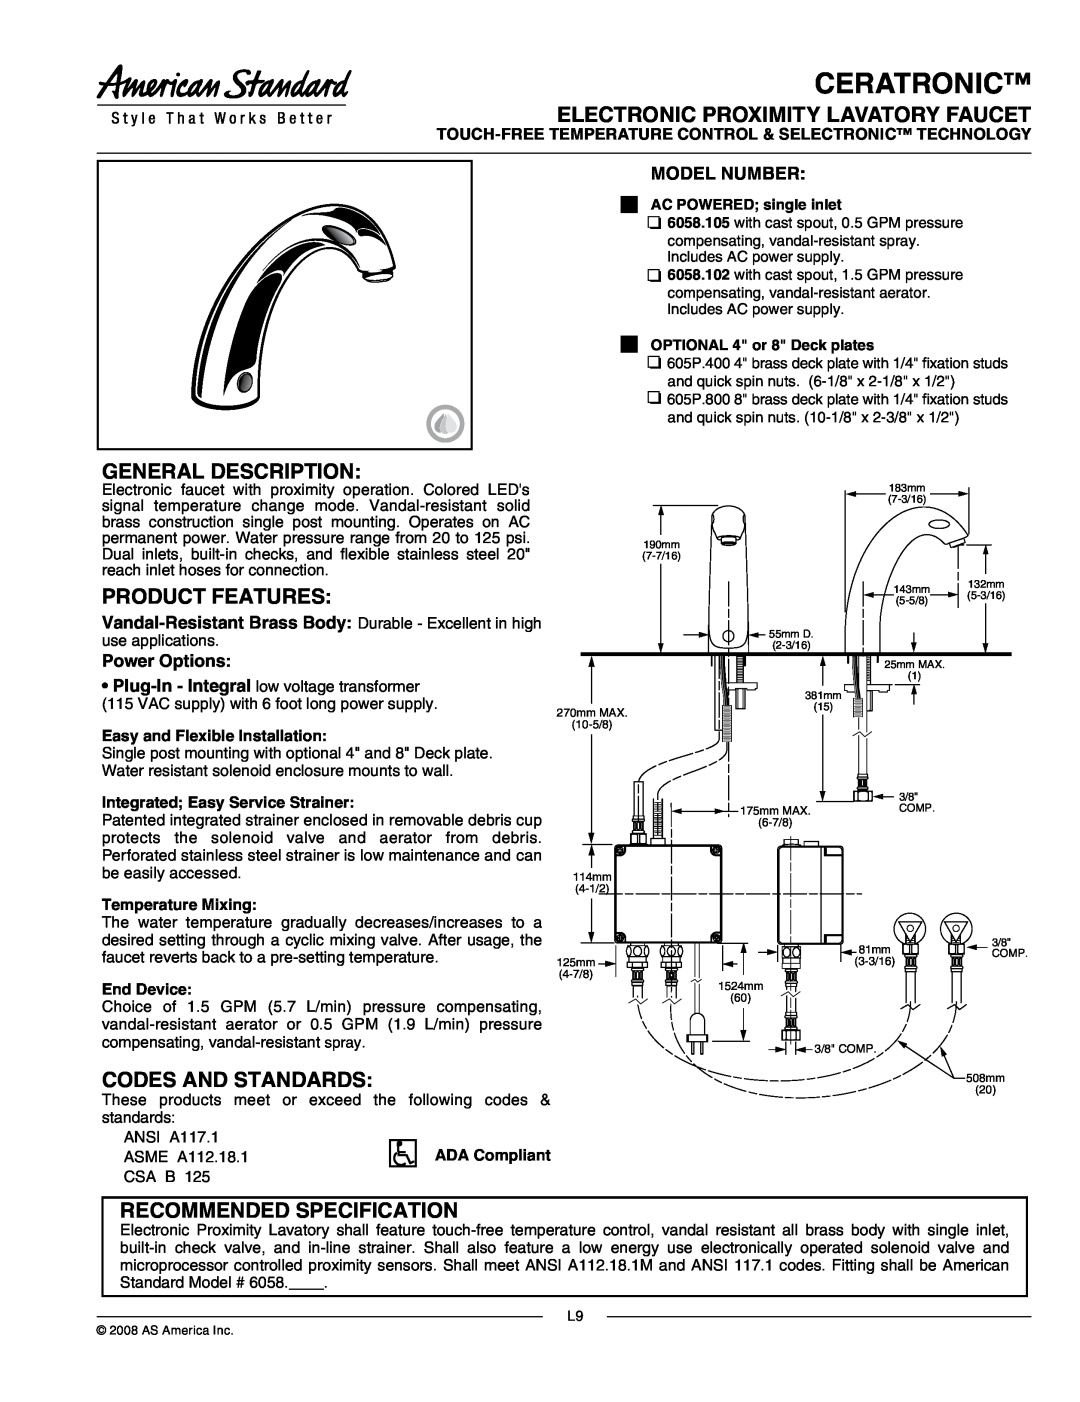 American Standard 6058.102 installation instructions Proximity Faucet with Touch-Free, Temperature Control, 6058.105 